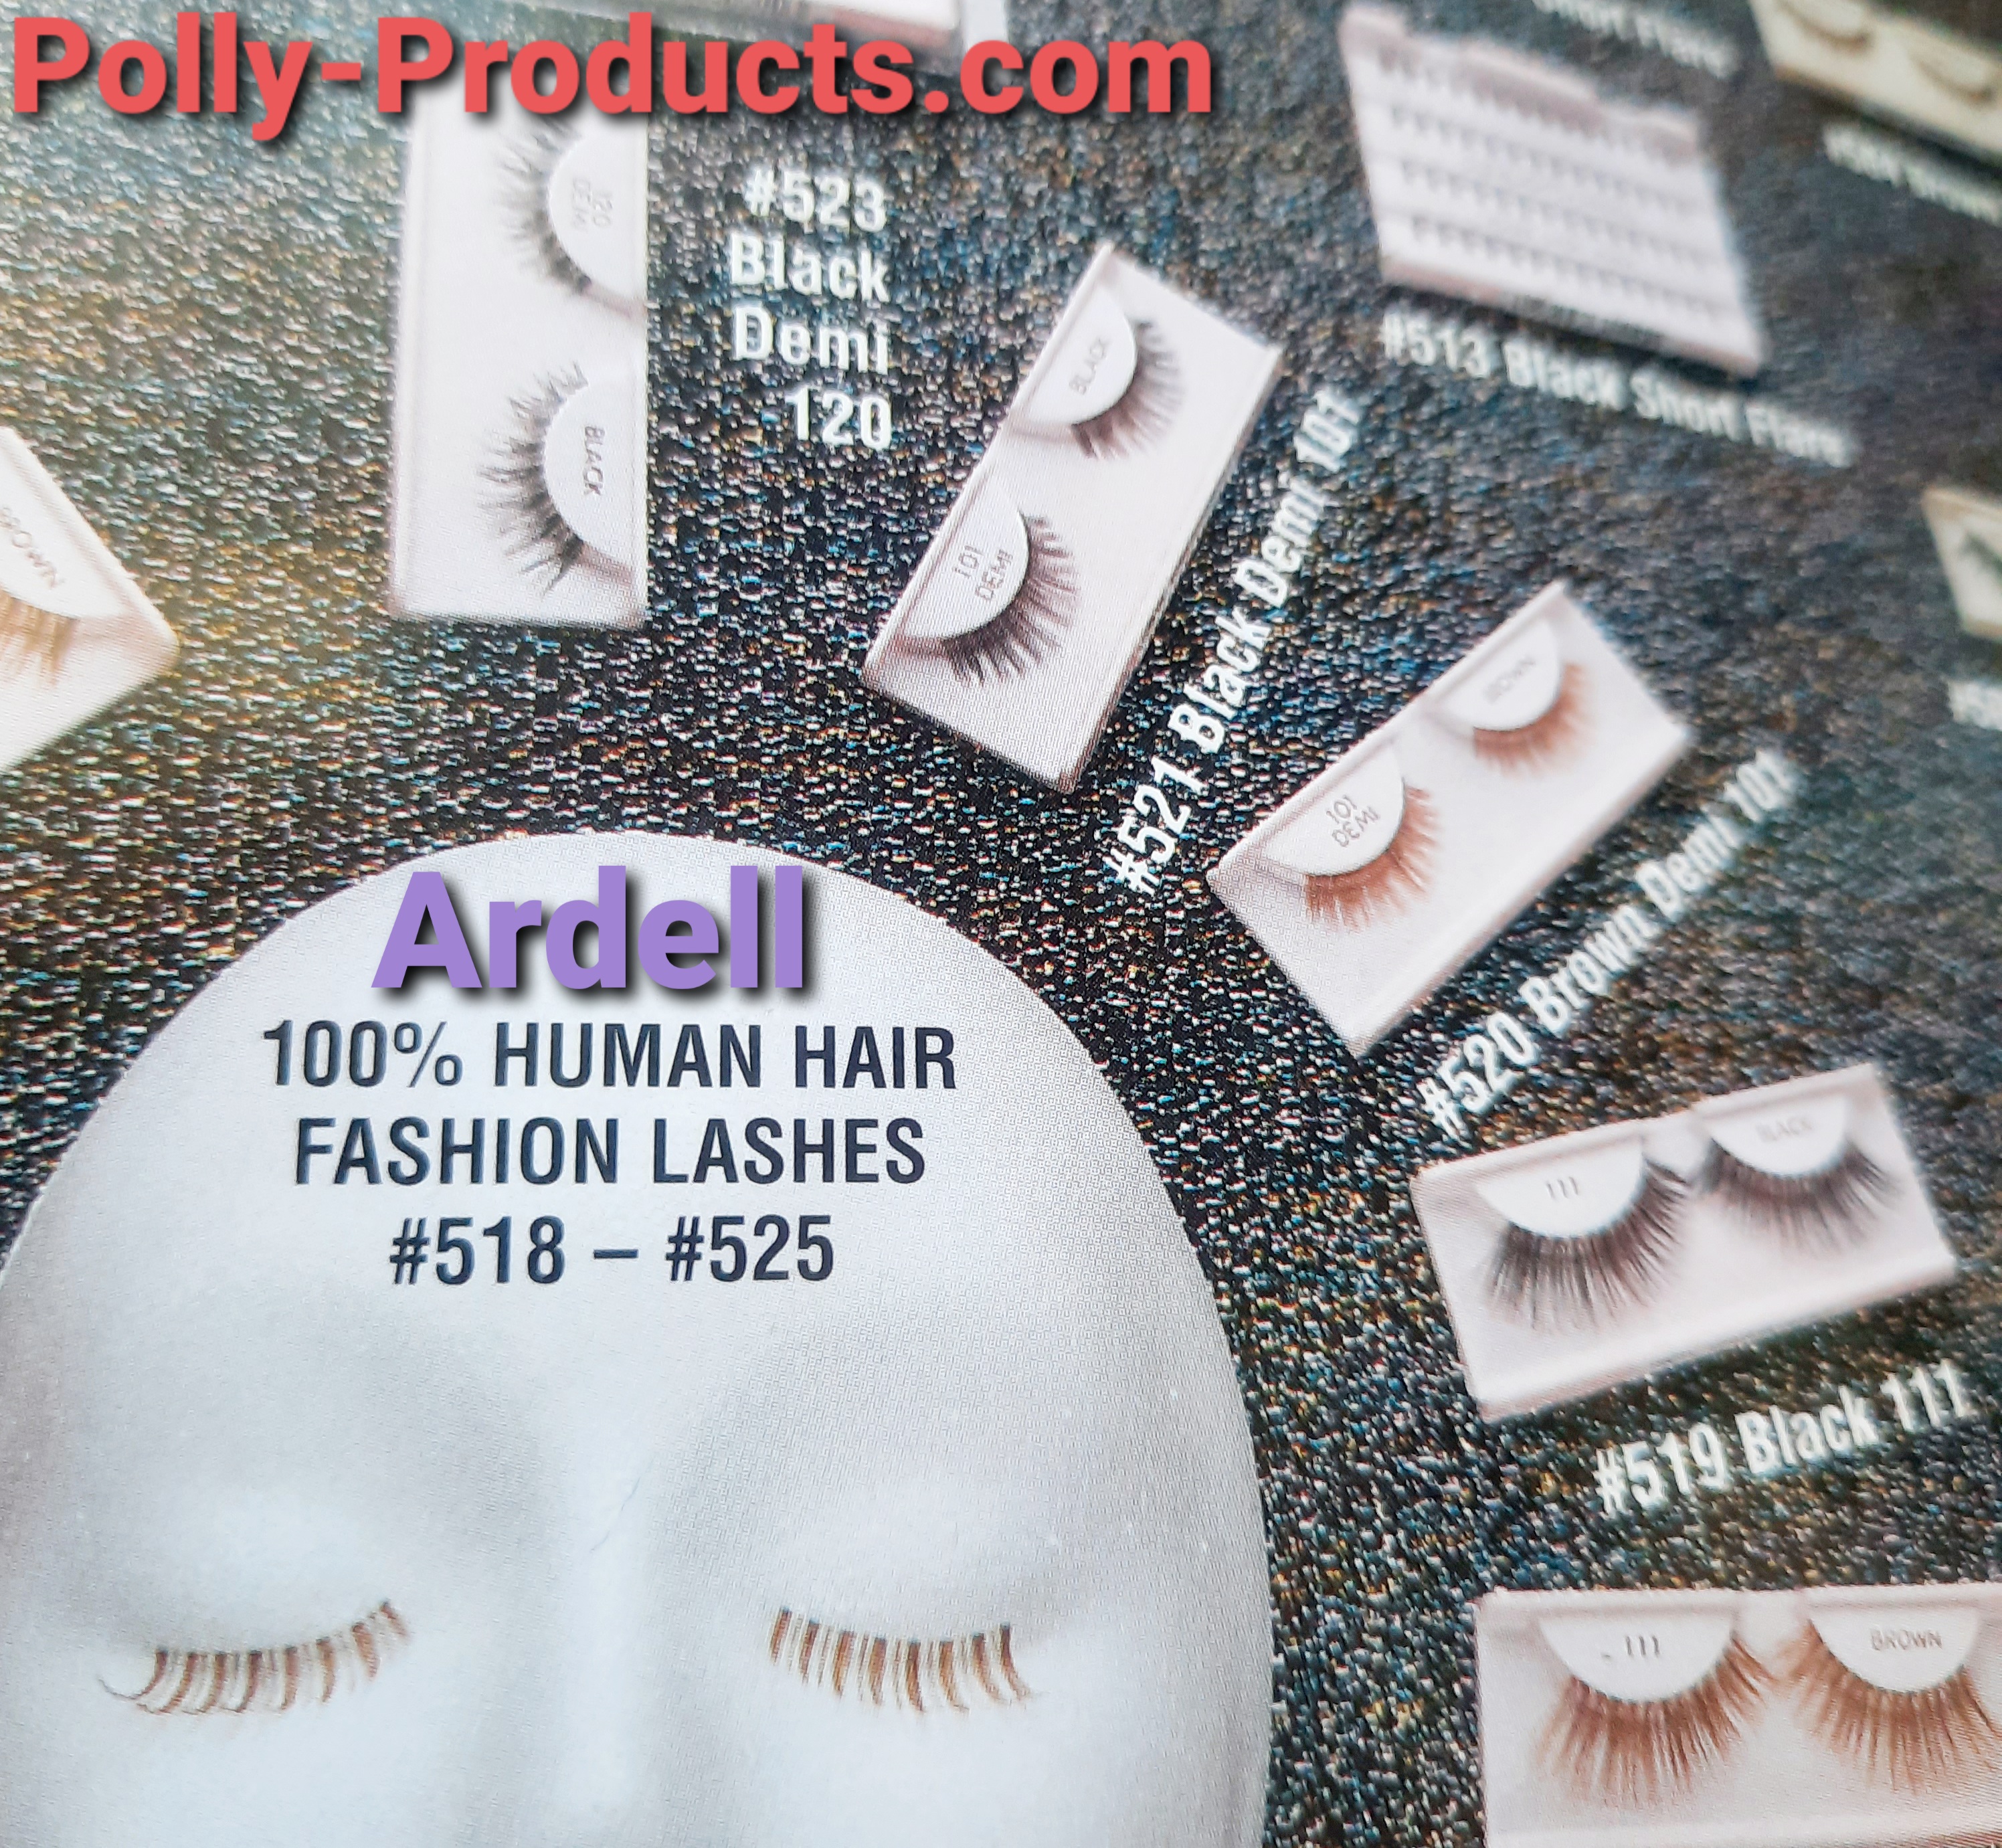 POLLY PRODUCTS BRILLIANTE tm BEAUTY FASHION LASHES, MADE IN THE USA ?? 